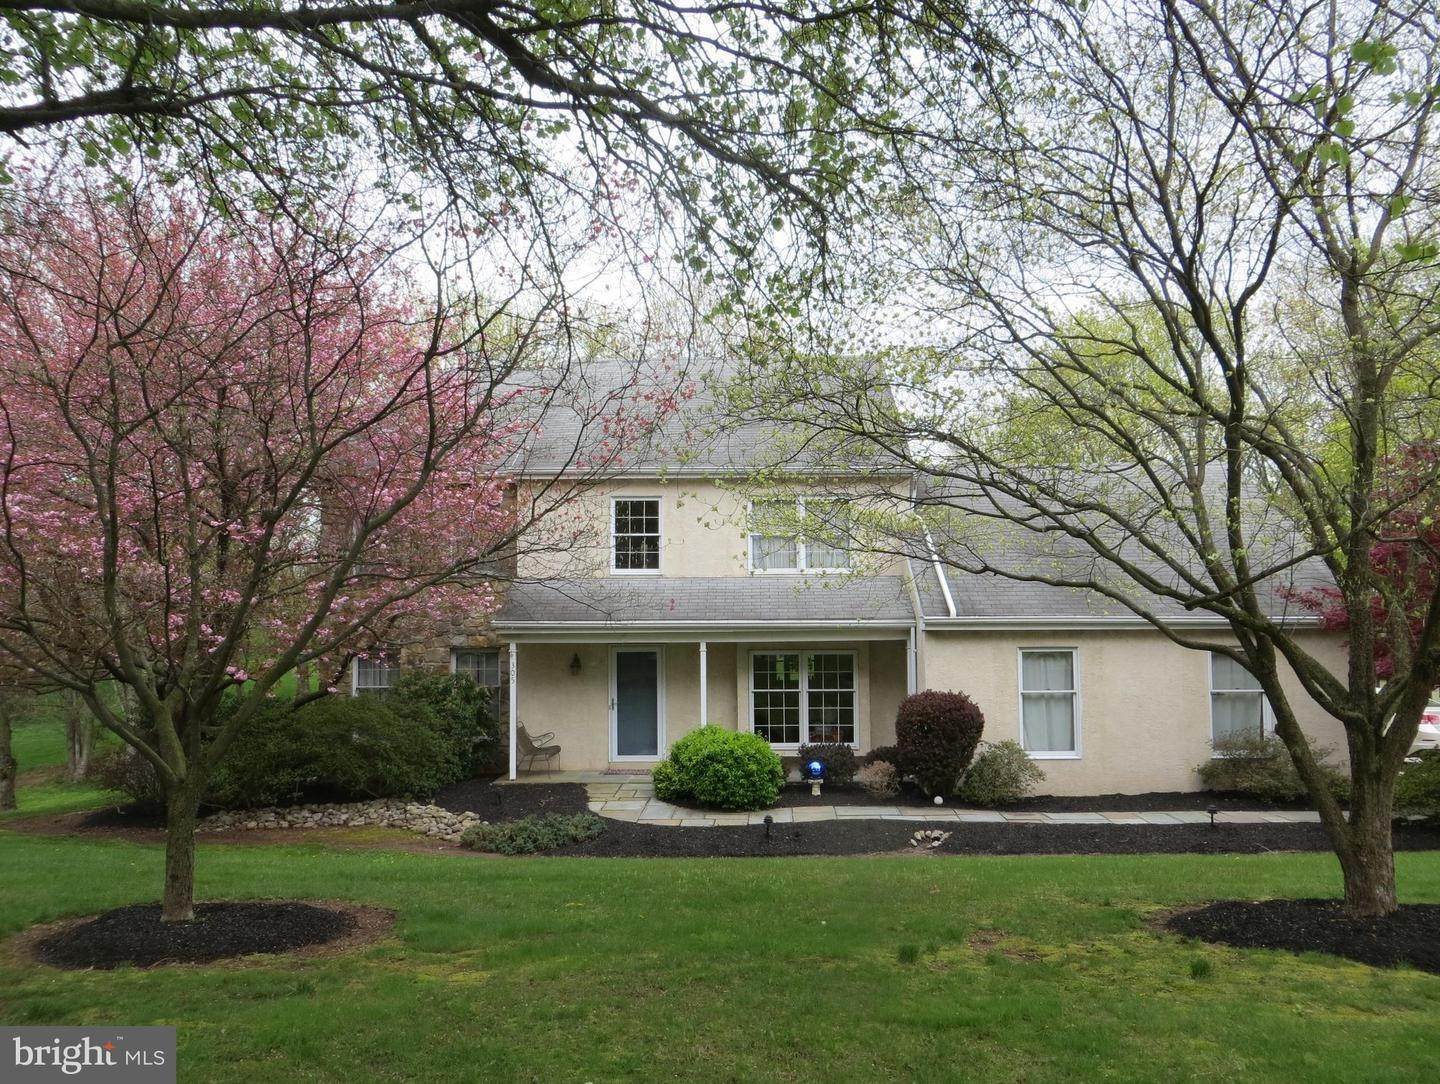 Residential for Sale at 305 WILLOWBROOKE Lane Royersford, Pennsylvania 19468 United States